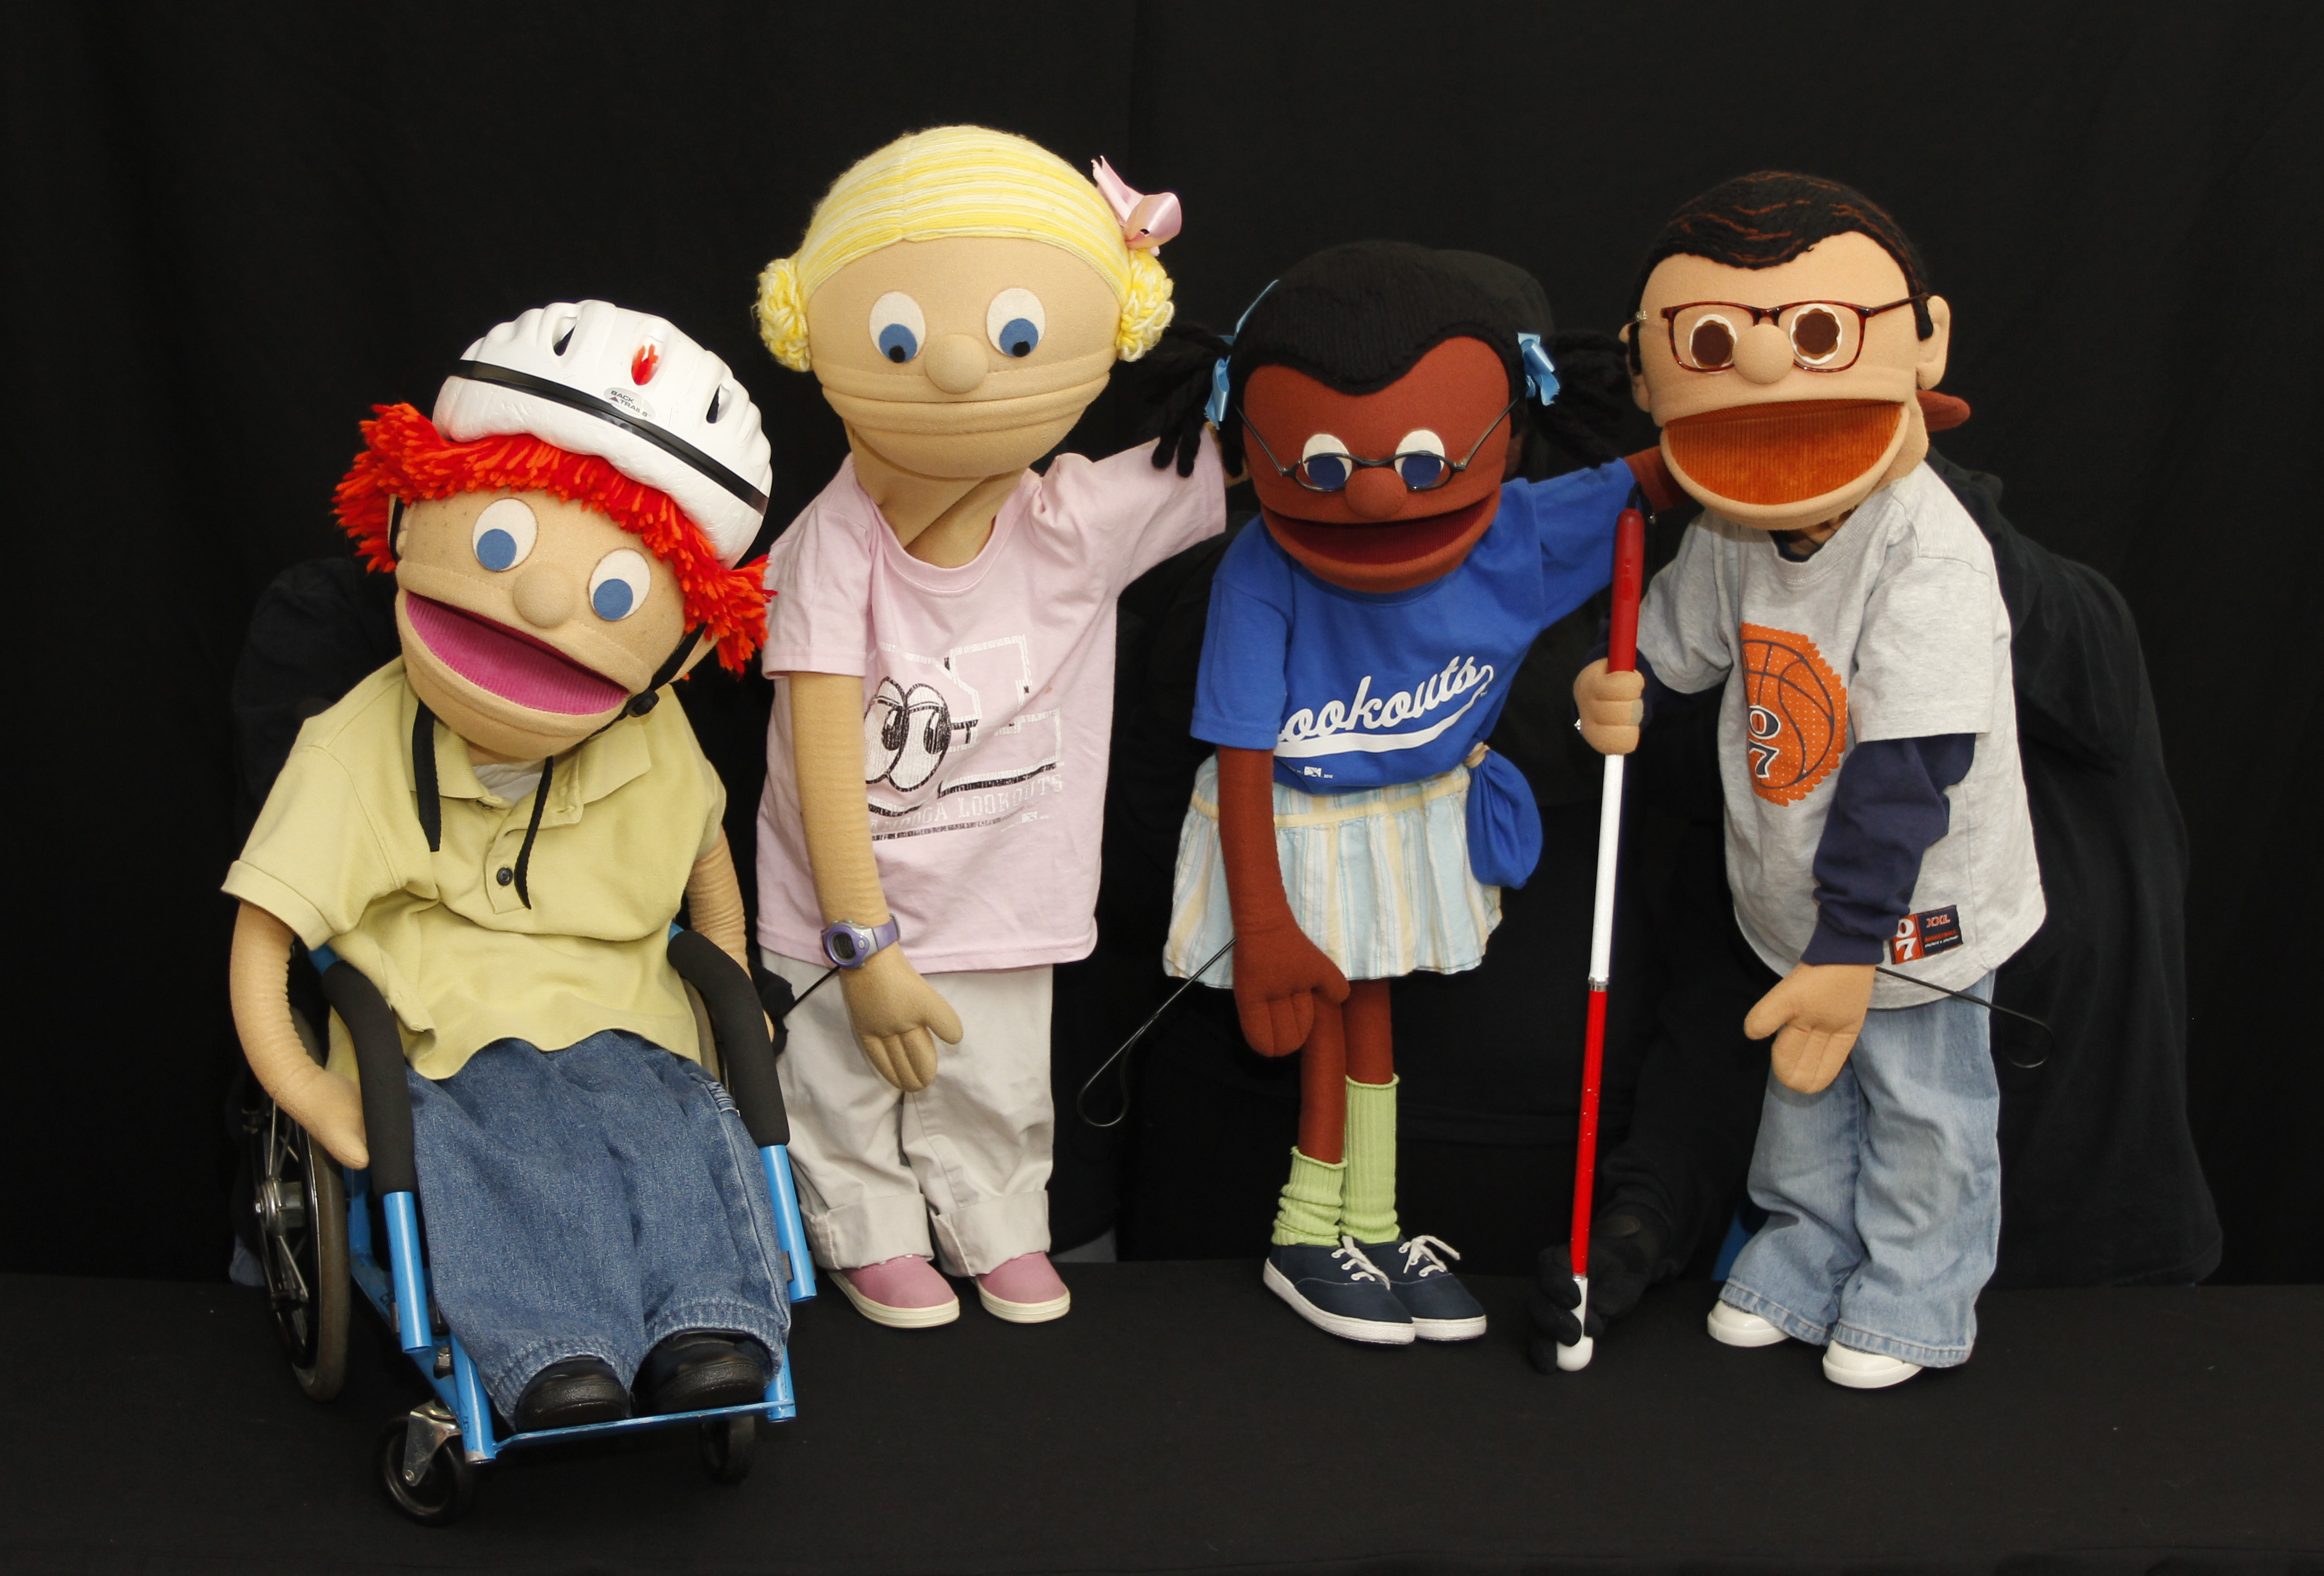 A new school program uses puppets to help students manage their